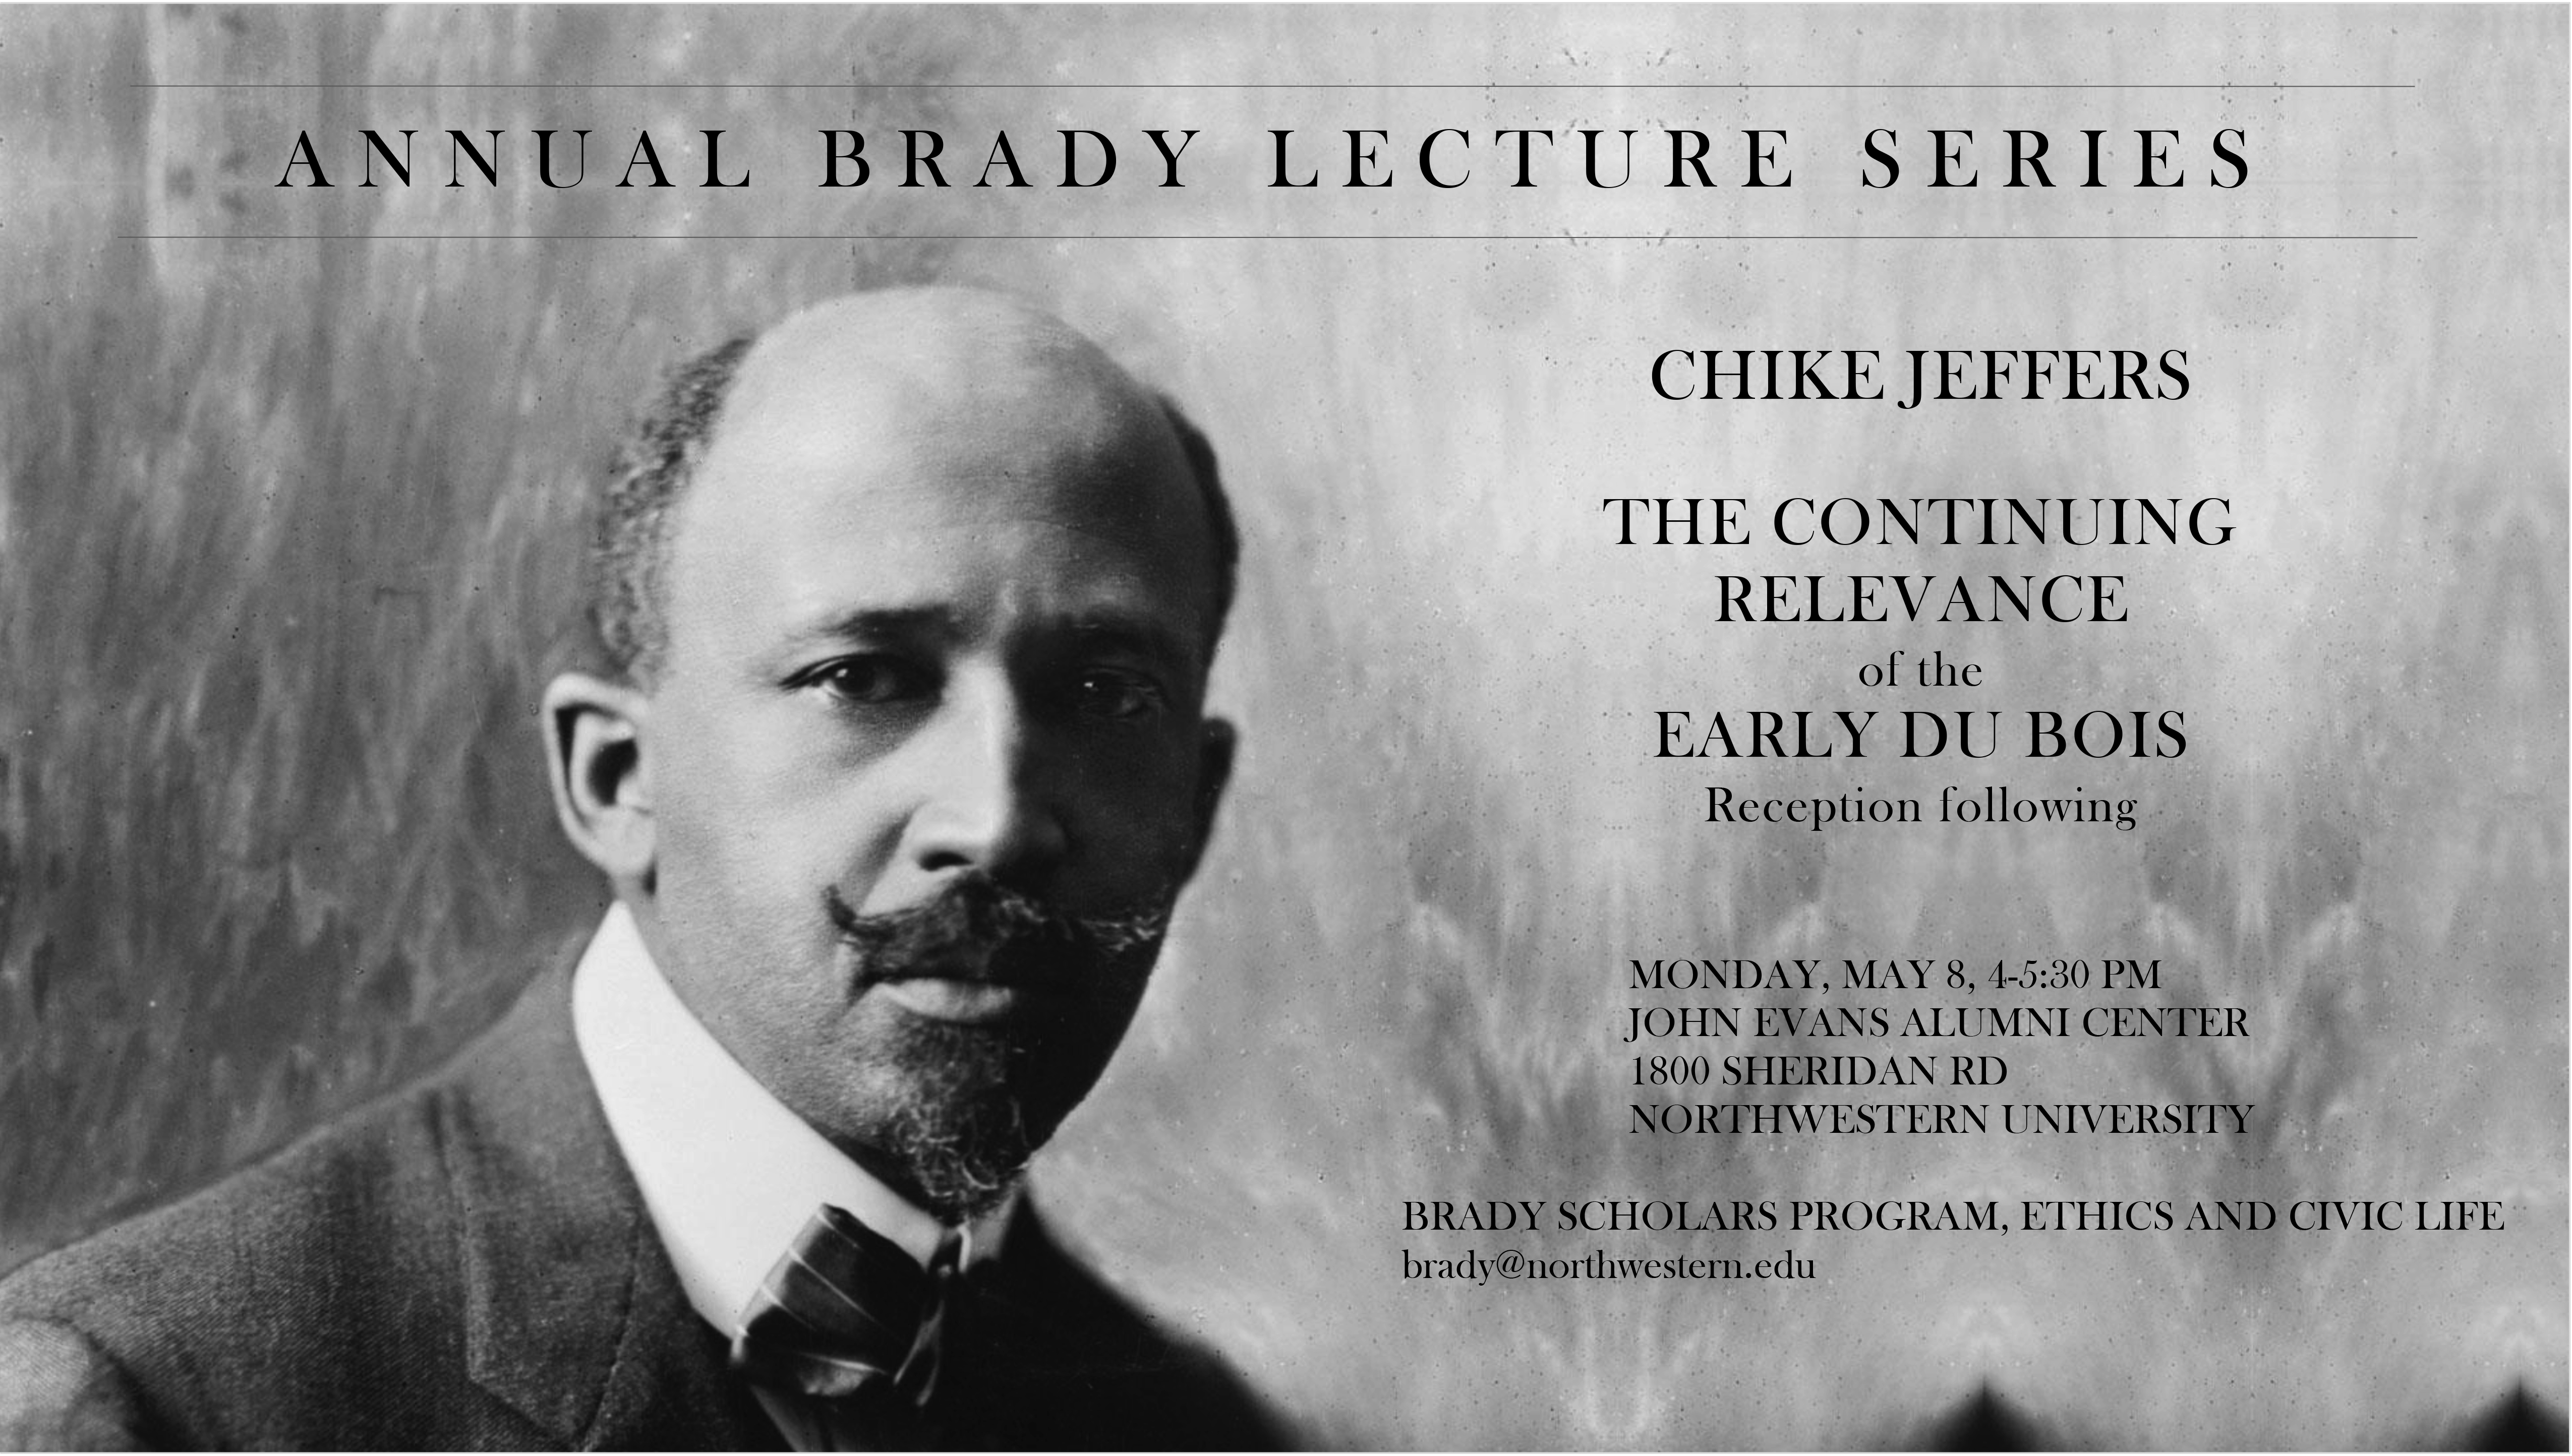 flyer for chike jeffers lecture